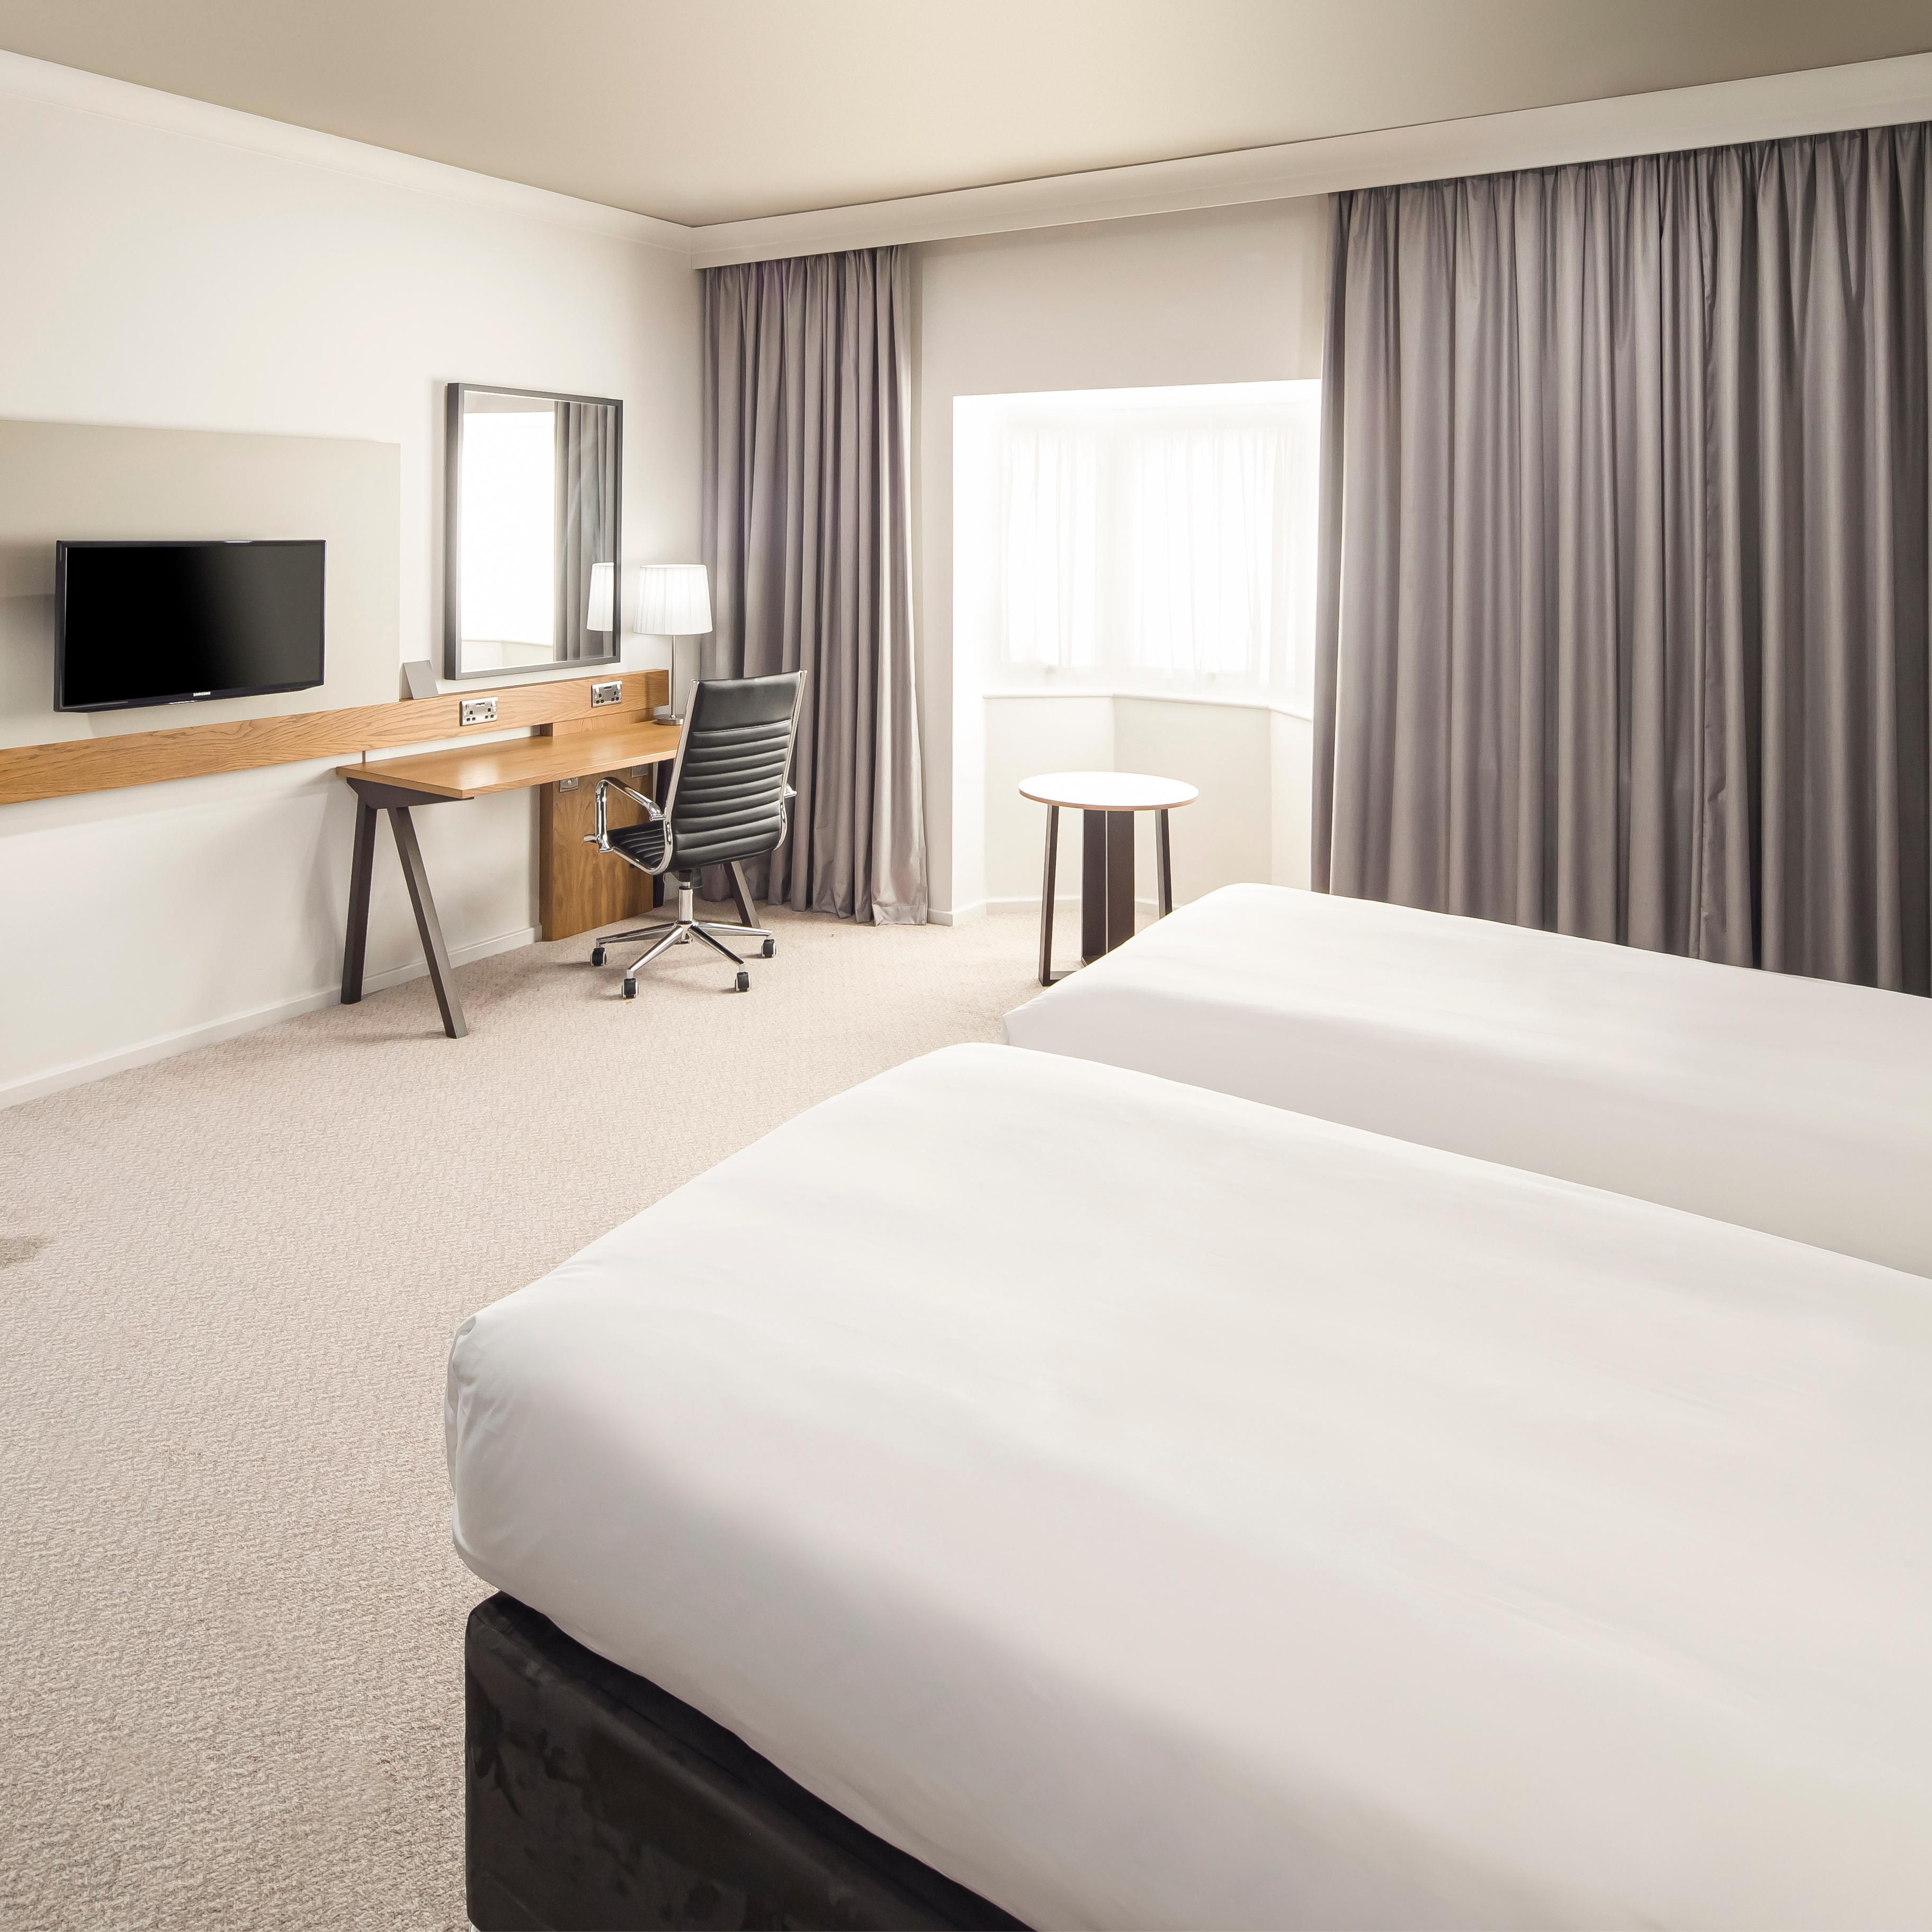 Enjoy your stay in our relaxing and modern twin bedroom.